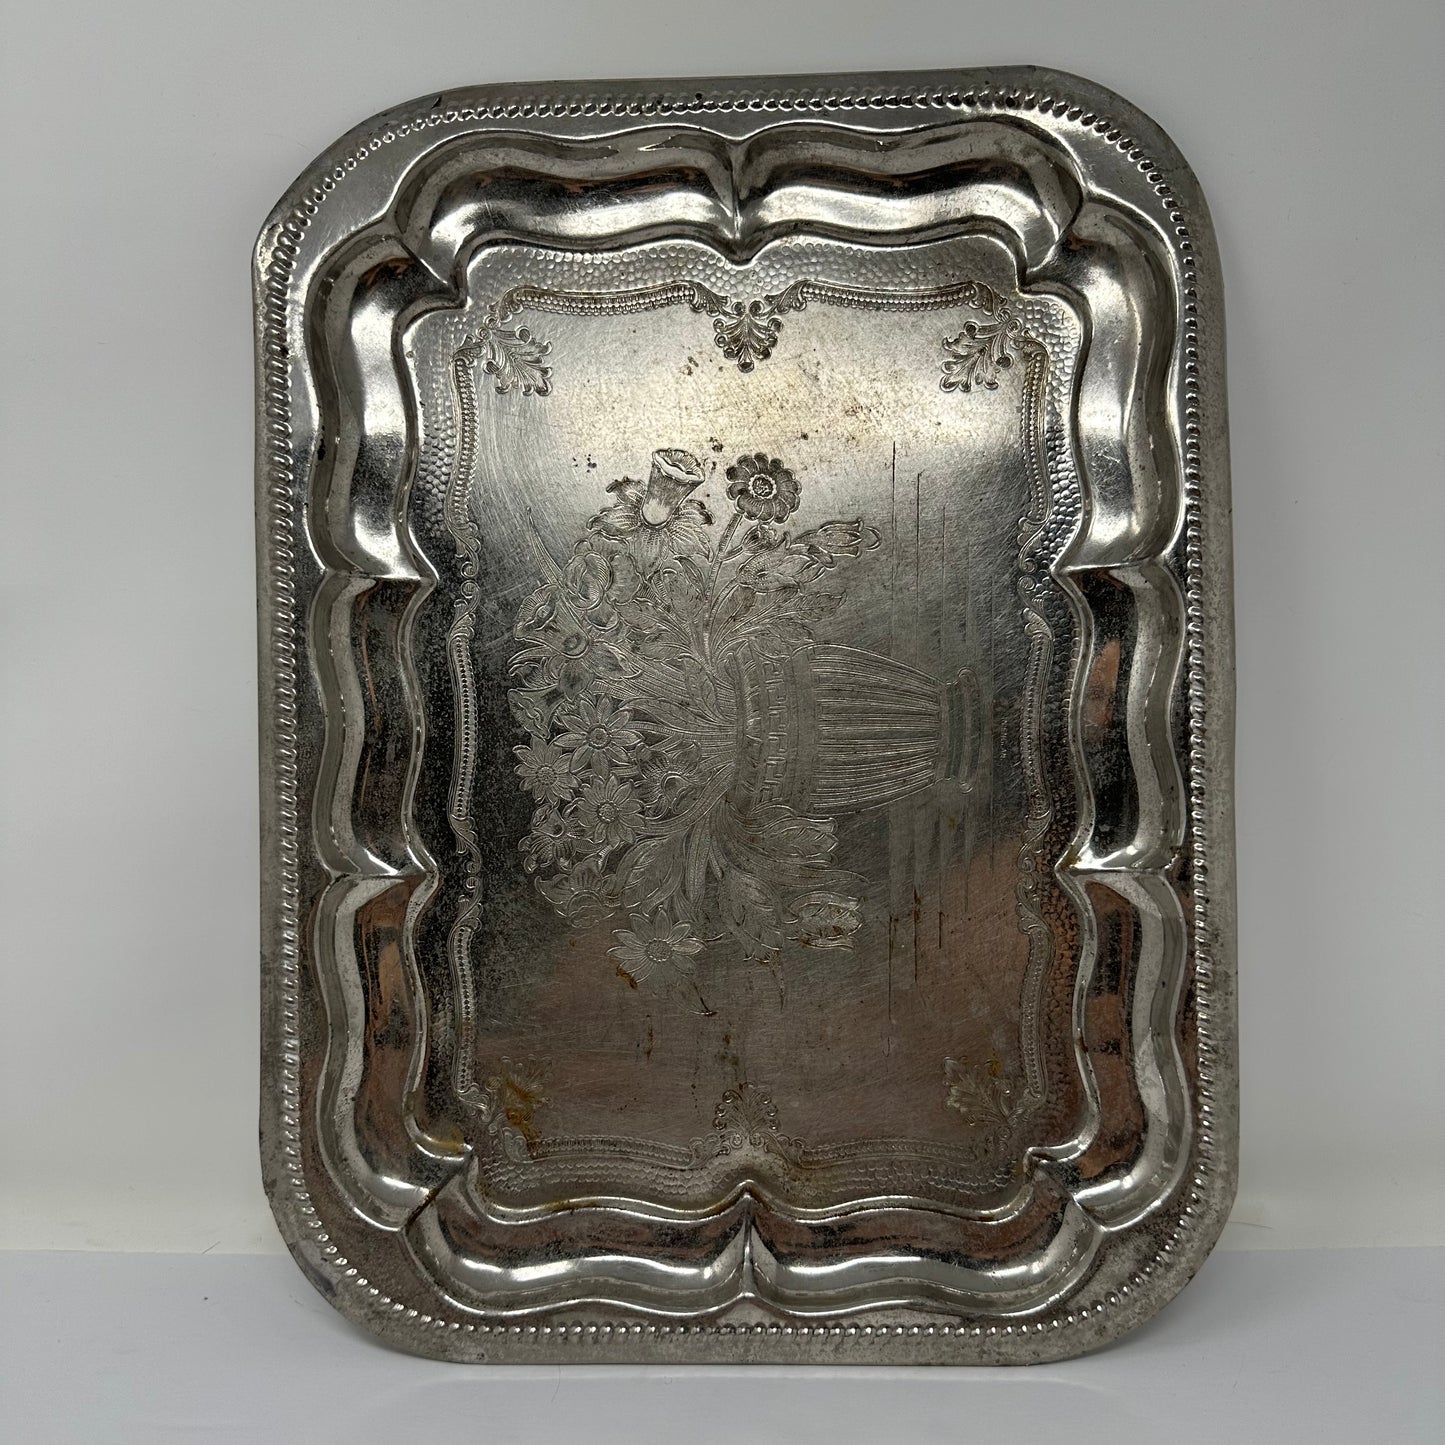 Vintage Silver Embossed Tray